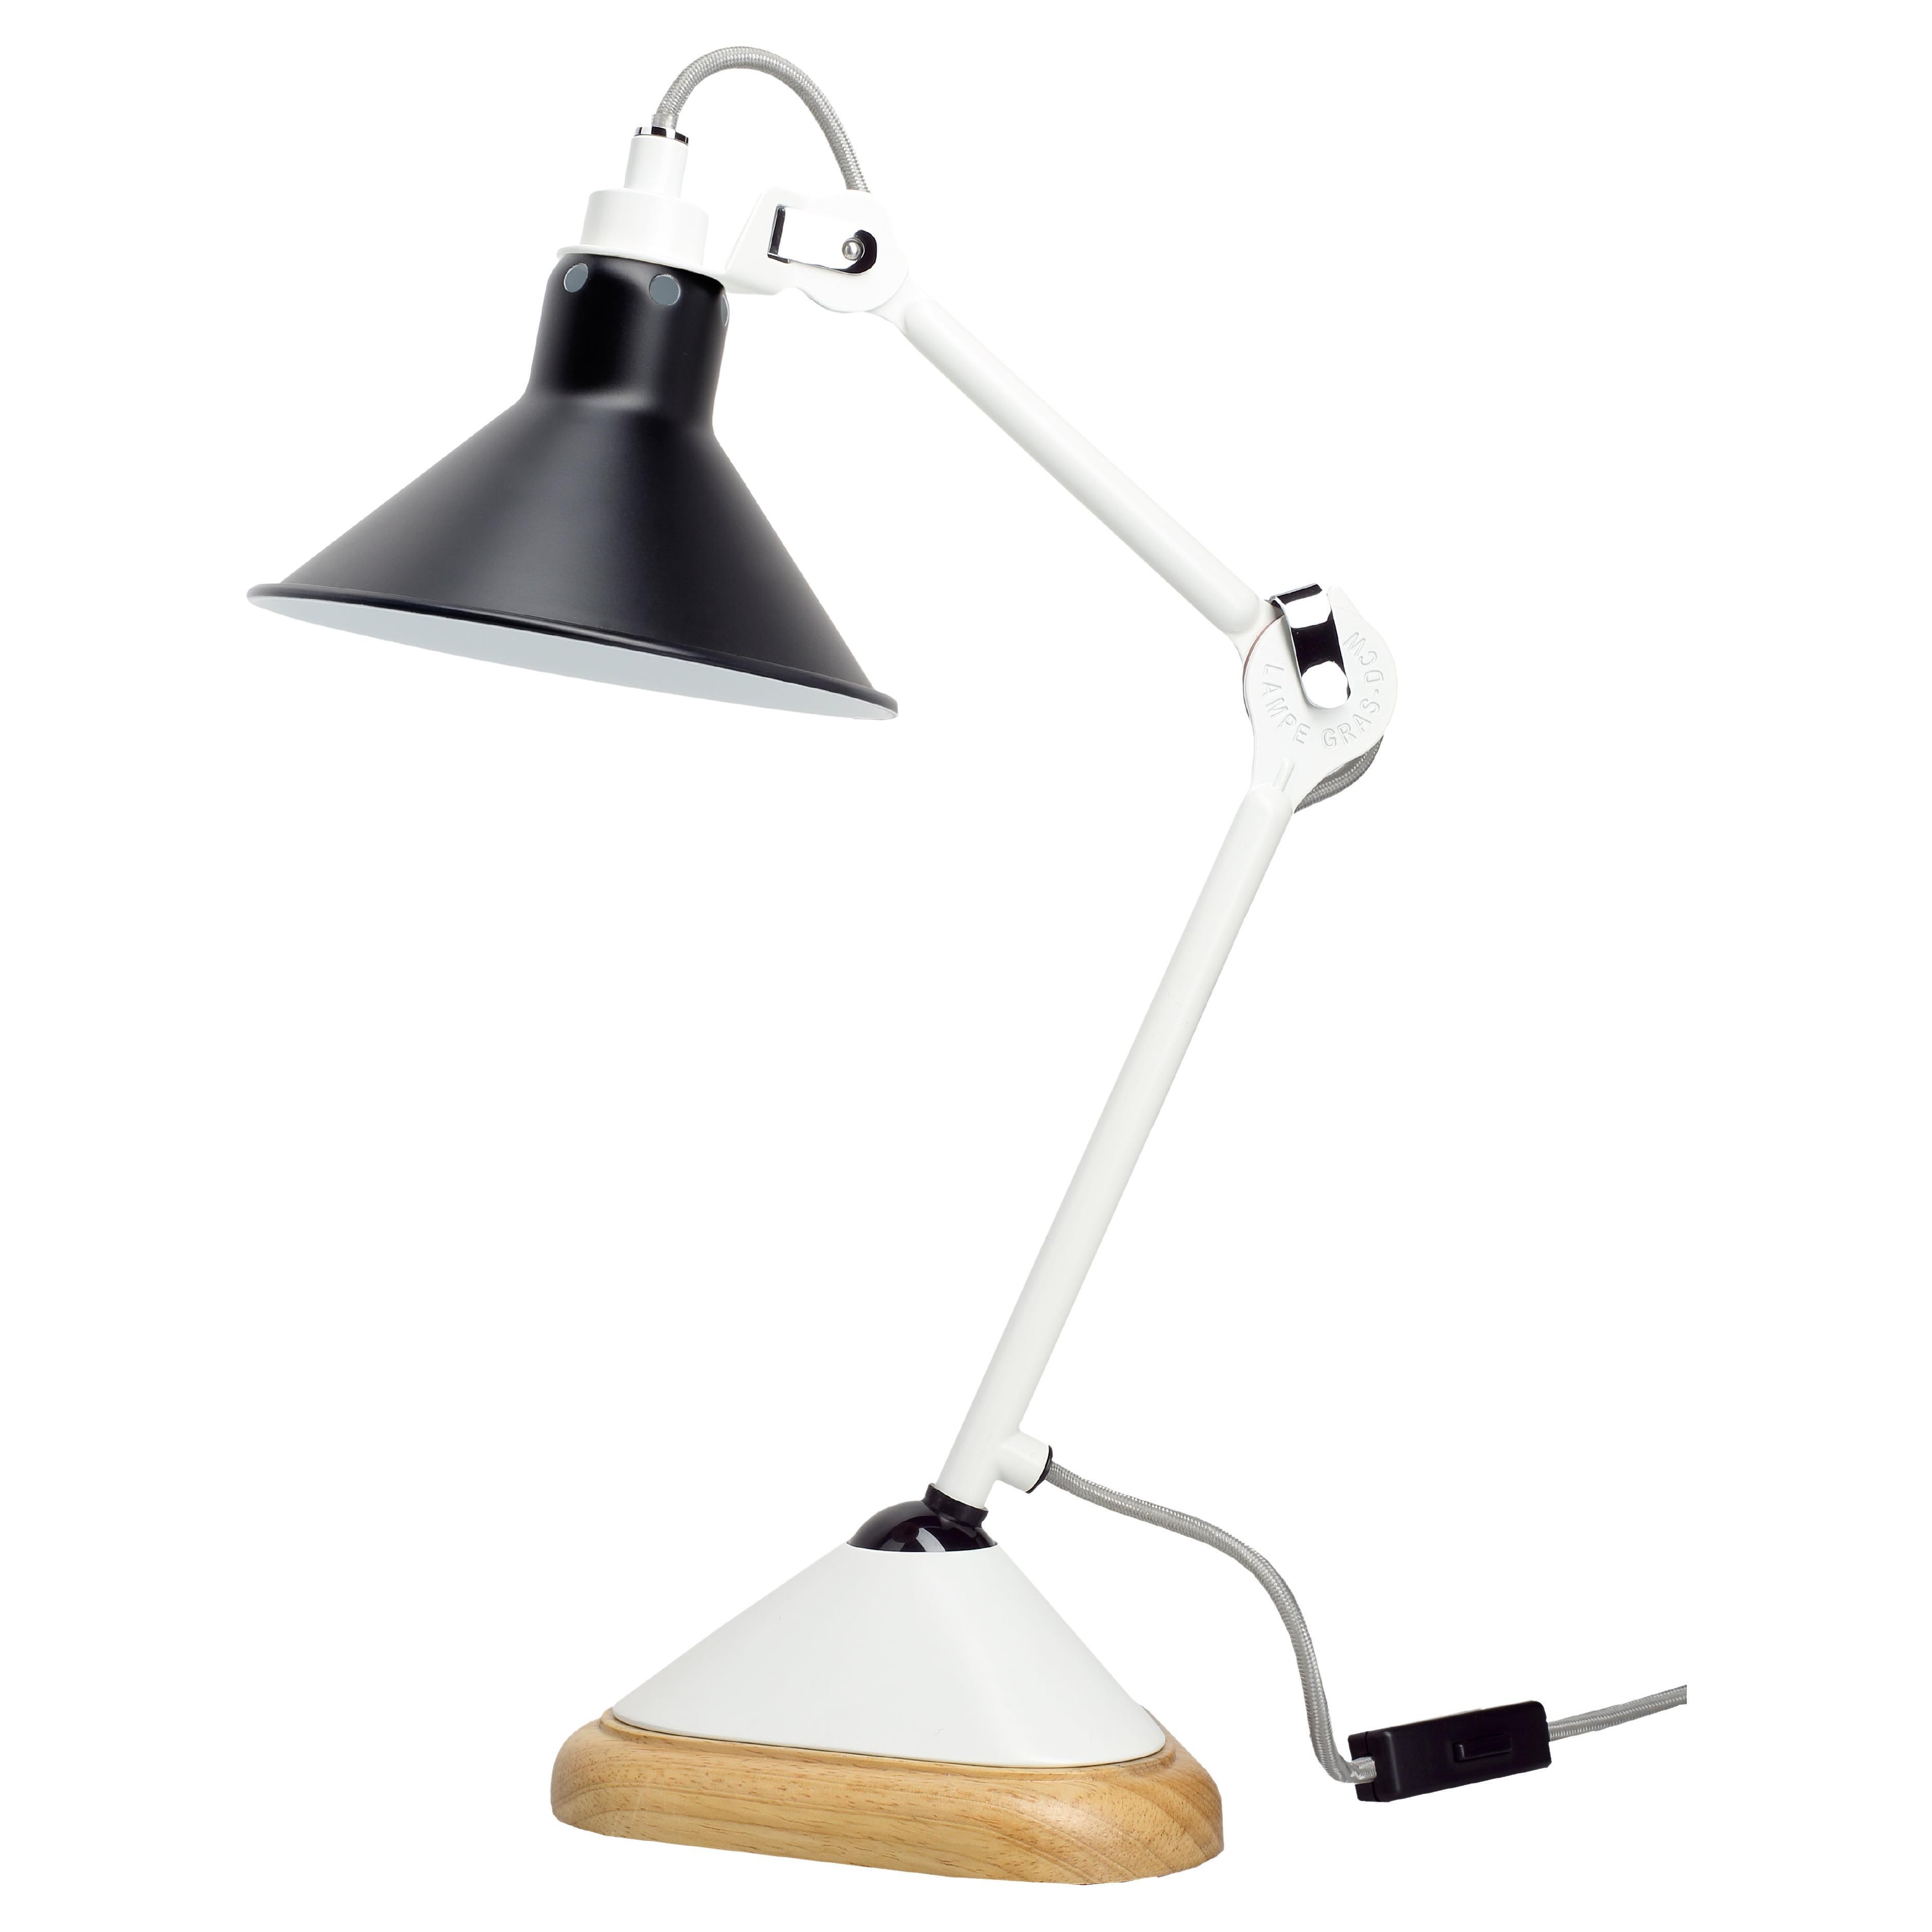 DCW Editions La Lampe Gras N°207 Conic Table Lamp in White Arm with Black Shade For Sale